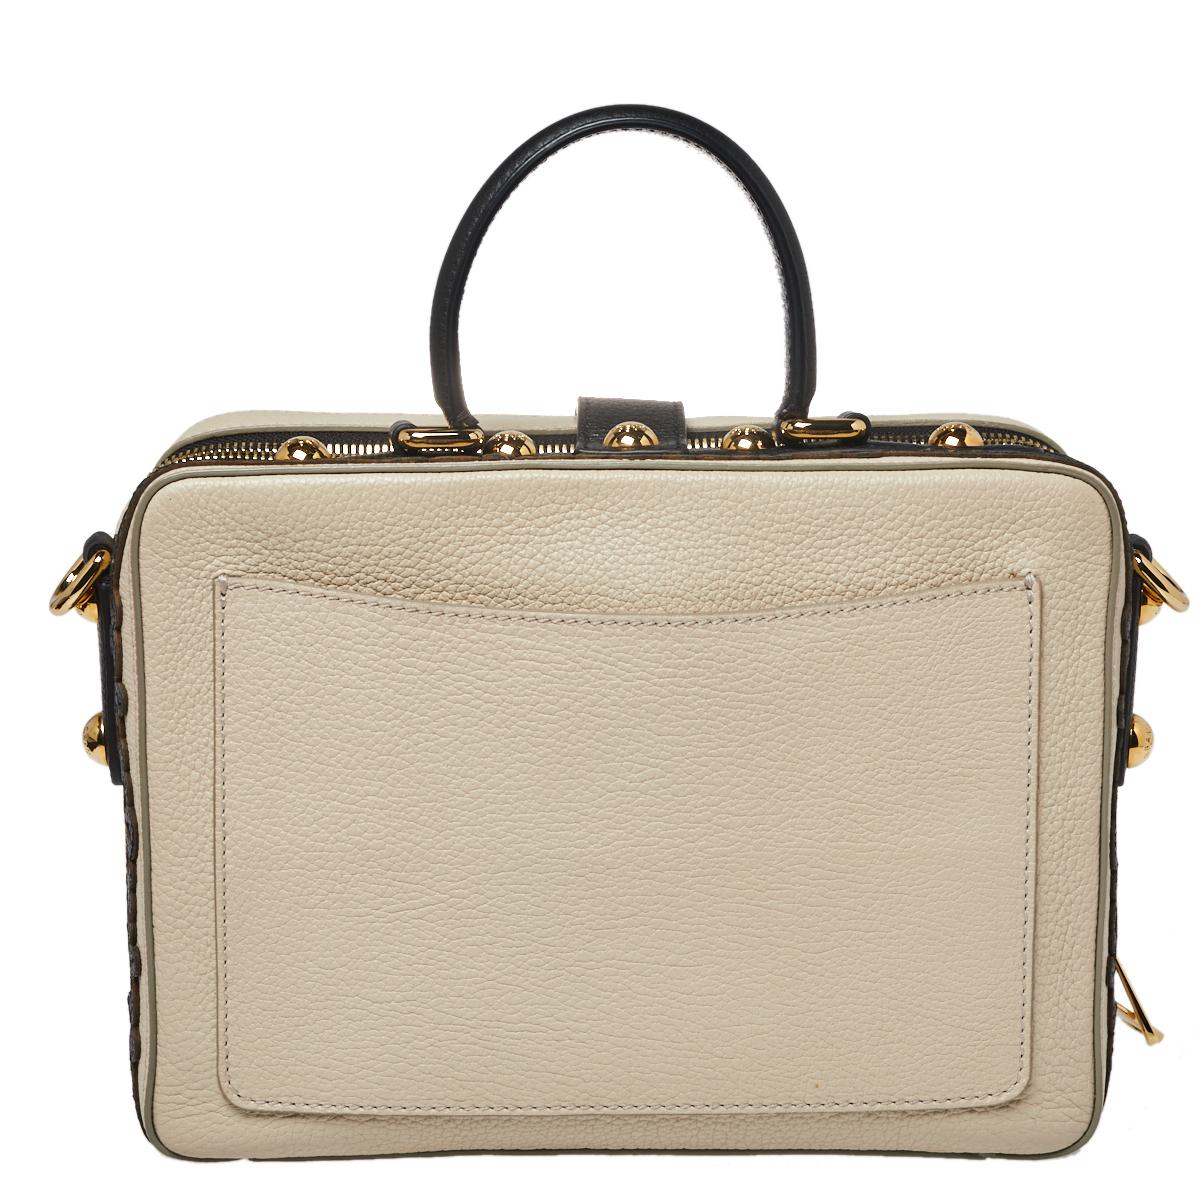 If you like to keep it ornate & luxe, go for this Dolce & Gabbana handbag. Crafted from beige-hued leather, it is enhanced with beautiful embellishments and gold-tone hardware. The bag features a top handle and a delicate floral embellishment on the